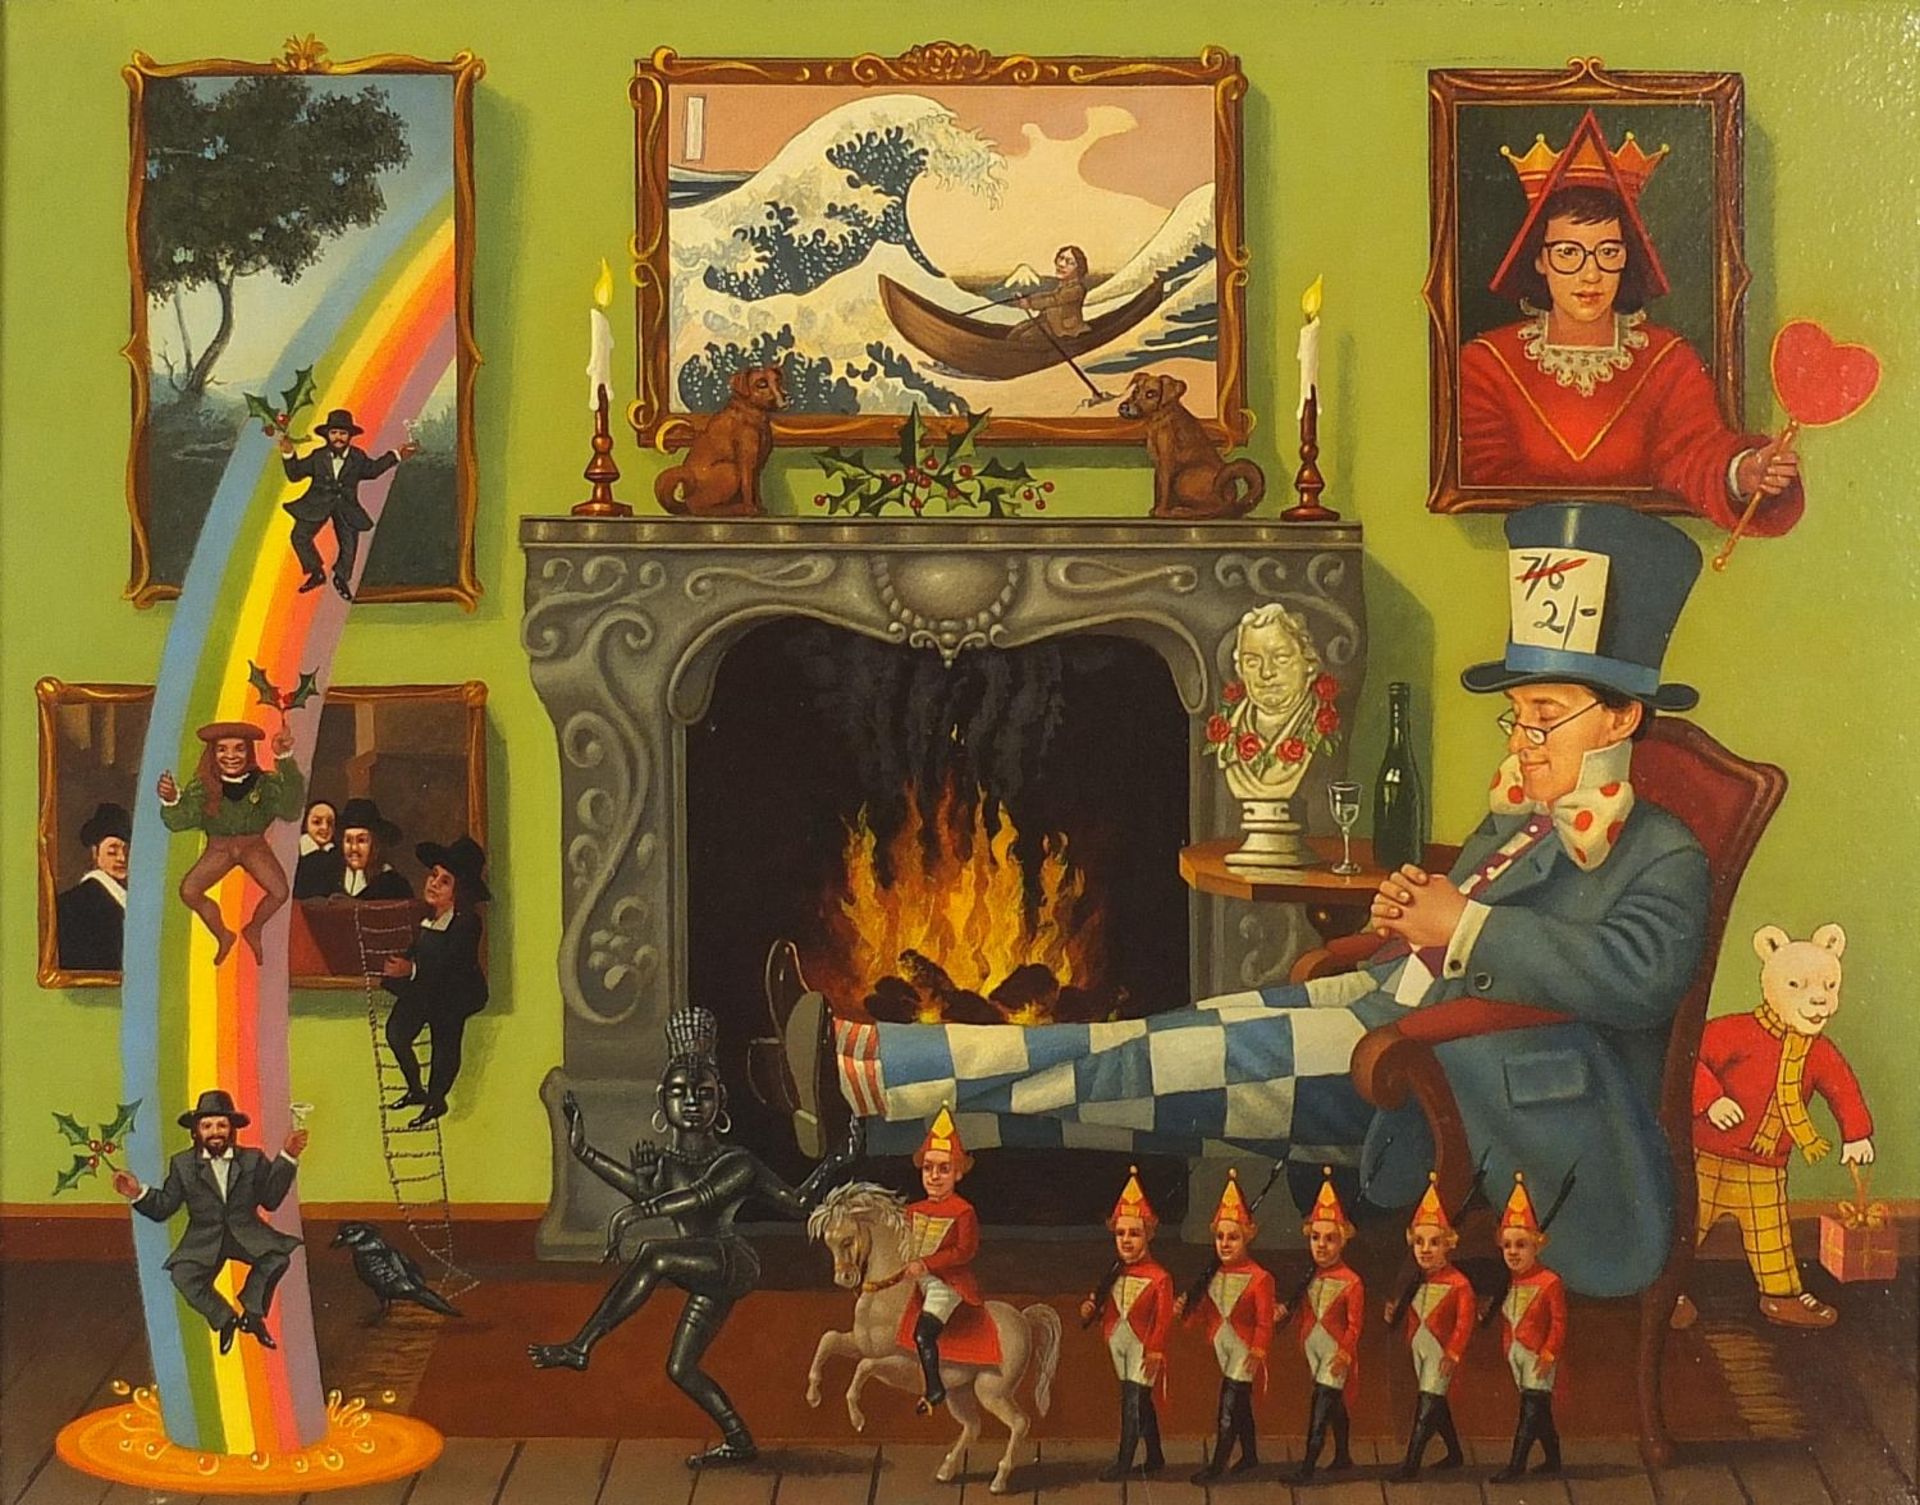 Peter Lawman - Interior scene with figure, rainbow and soldiers, comical oil on canvas, mounted